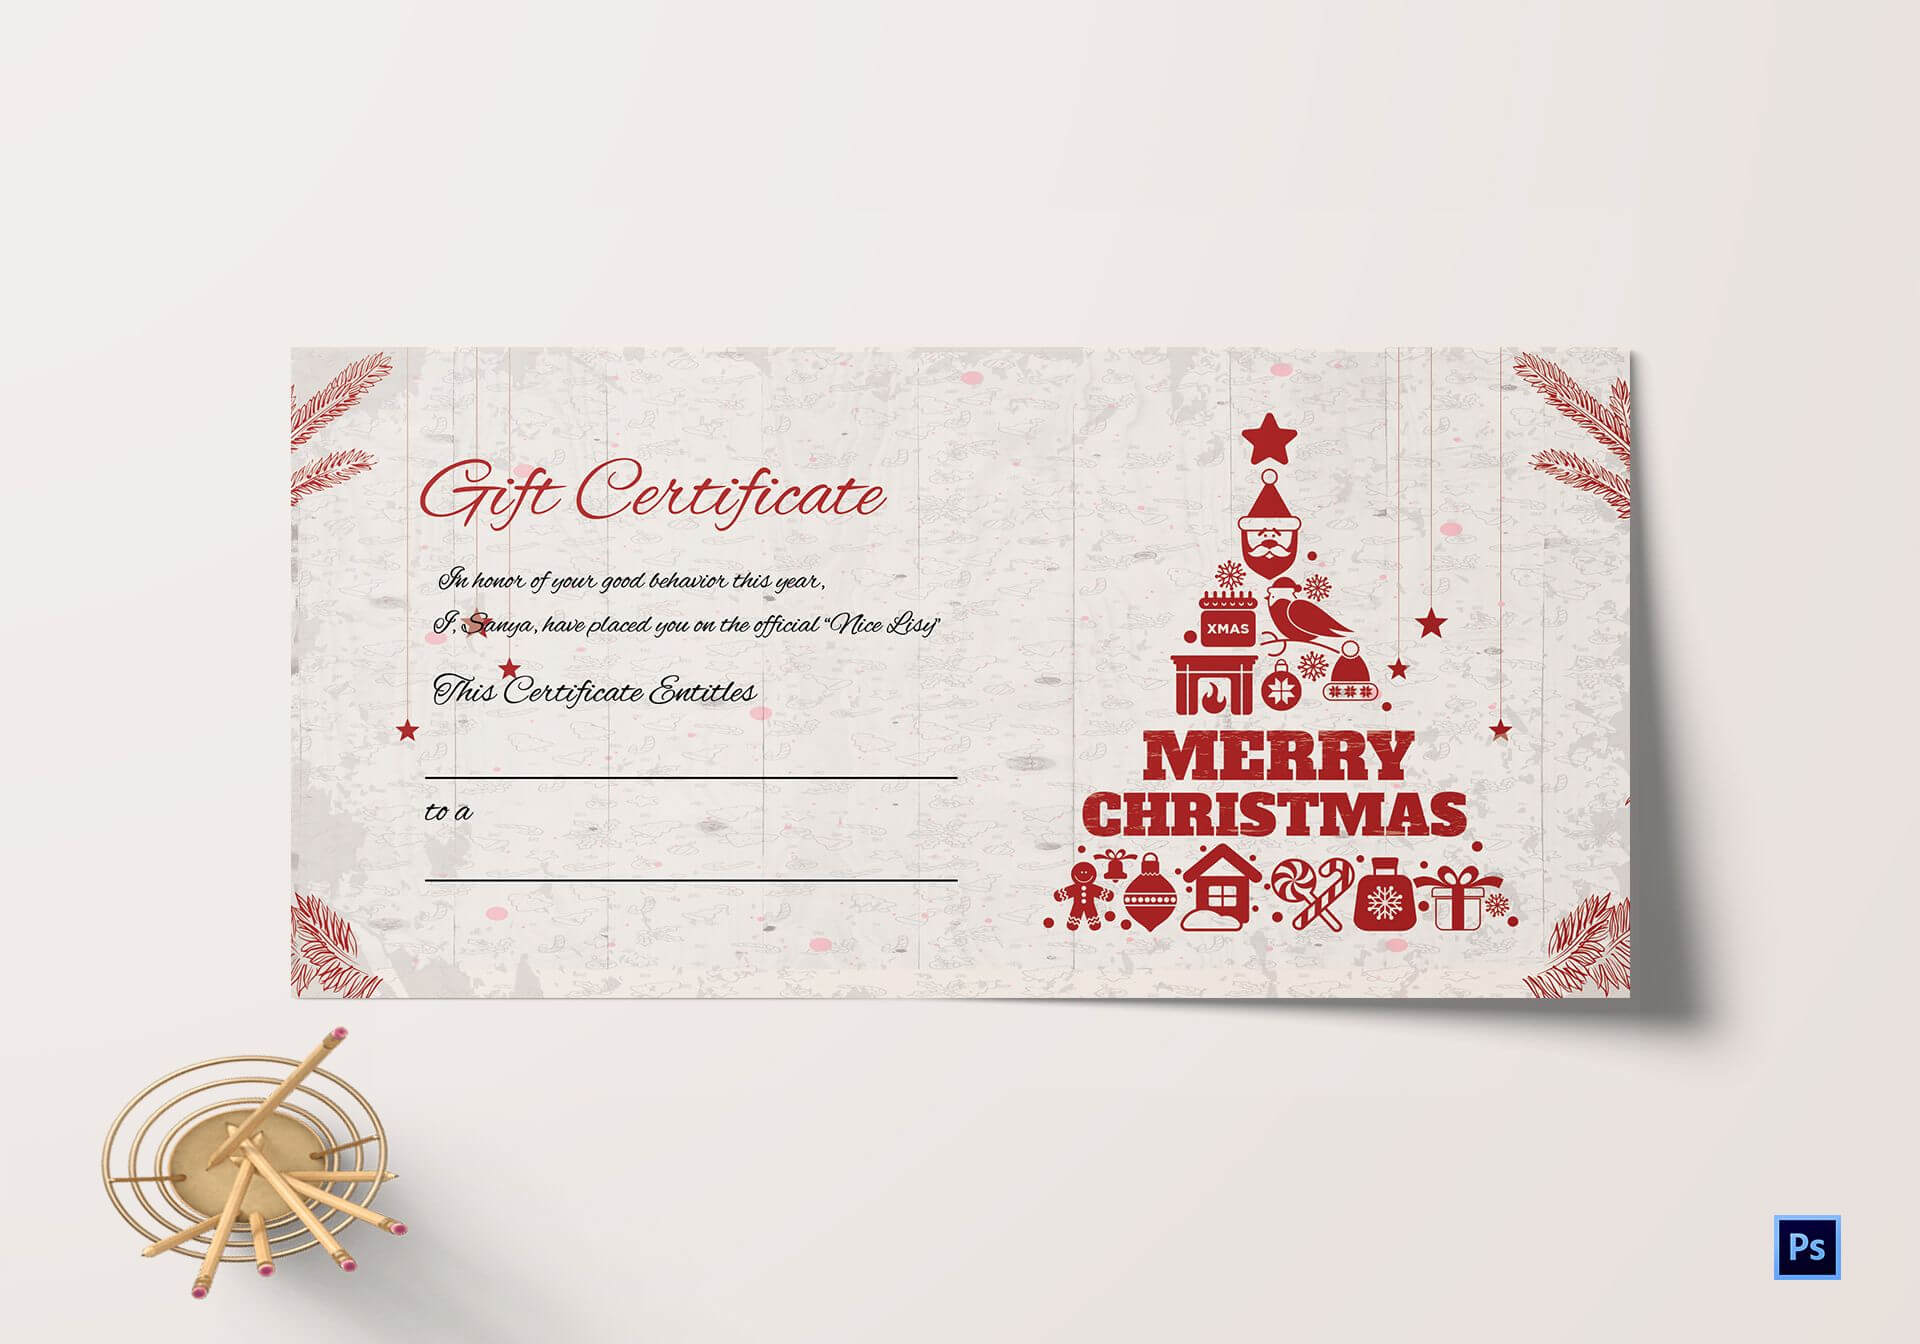 Christmas Gift Certificate Template | Printablepedia Regarding Merry Christmas Gift Certificate Templates